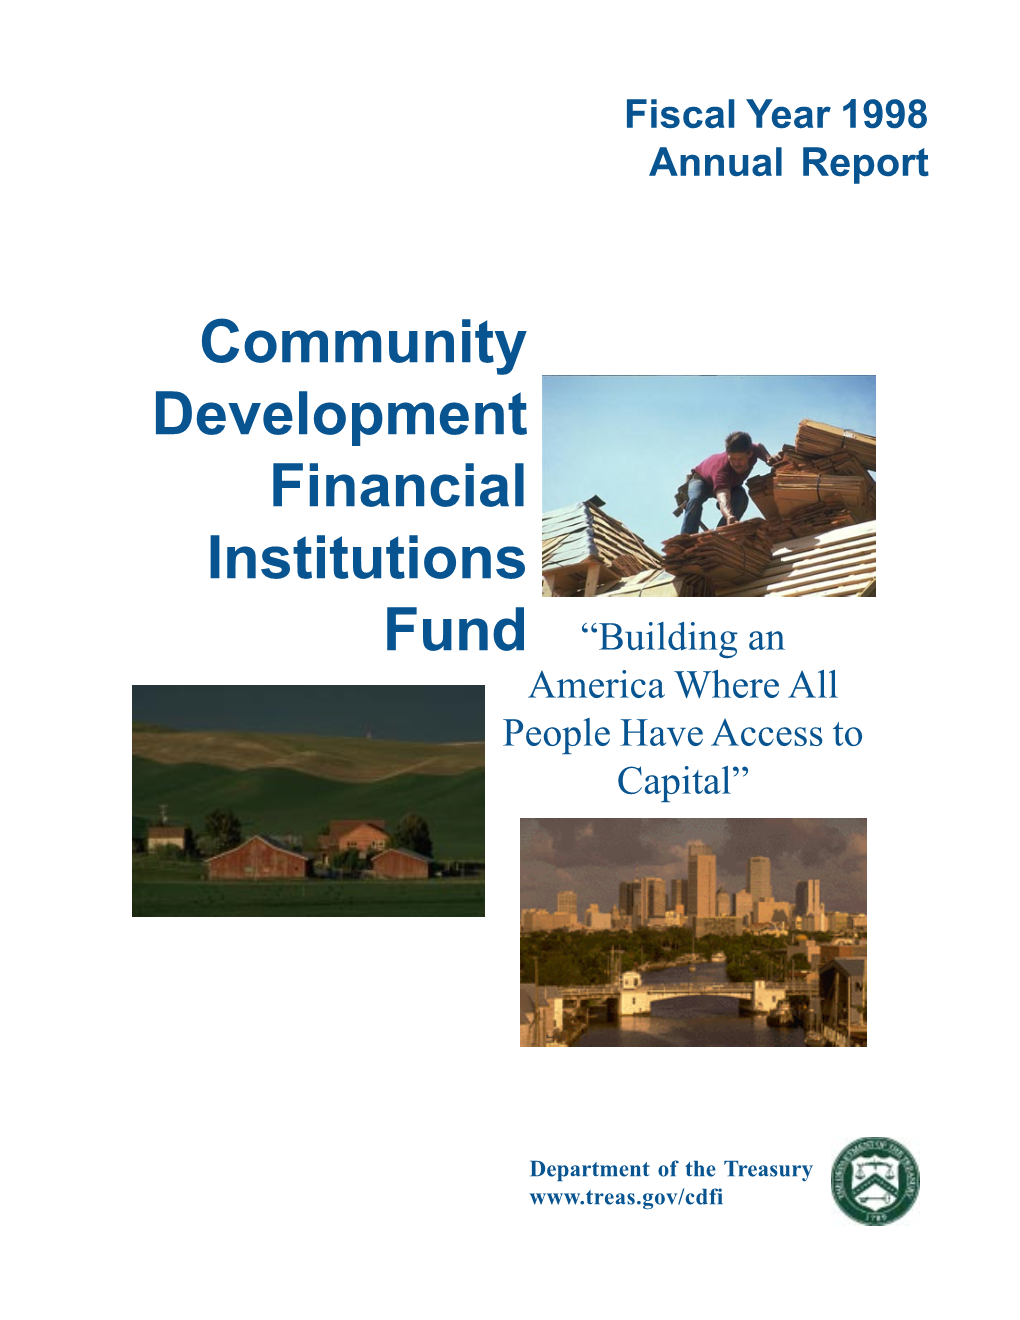 Fiscal Year 1998 Annual Report